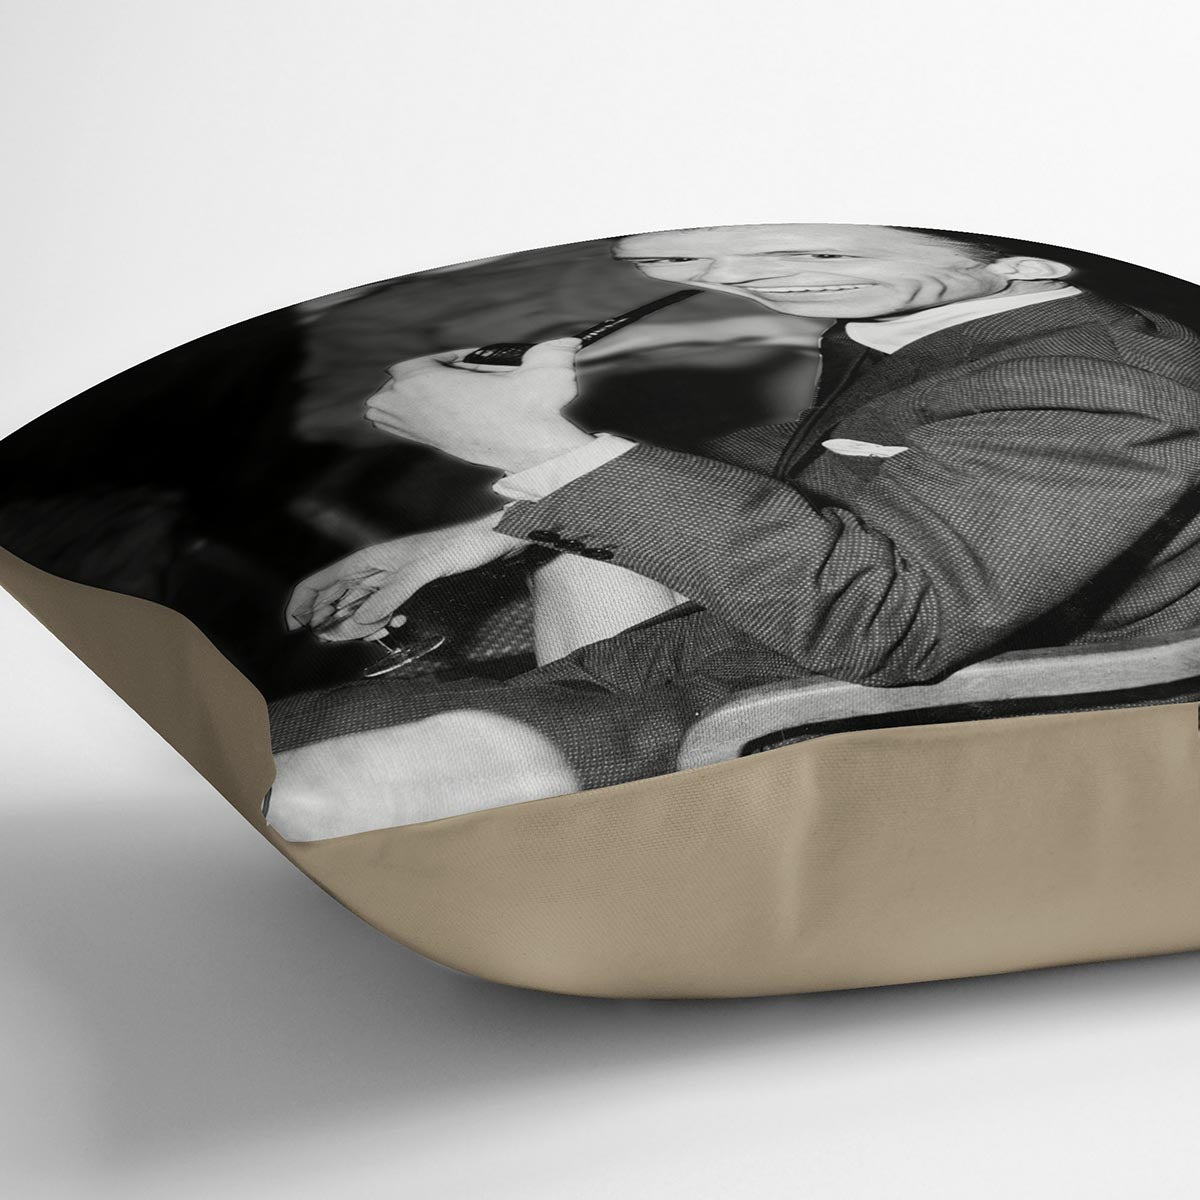 Frank Sinatra with pipe Cushion